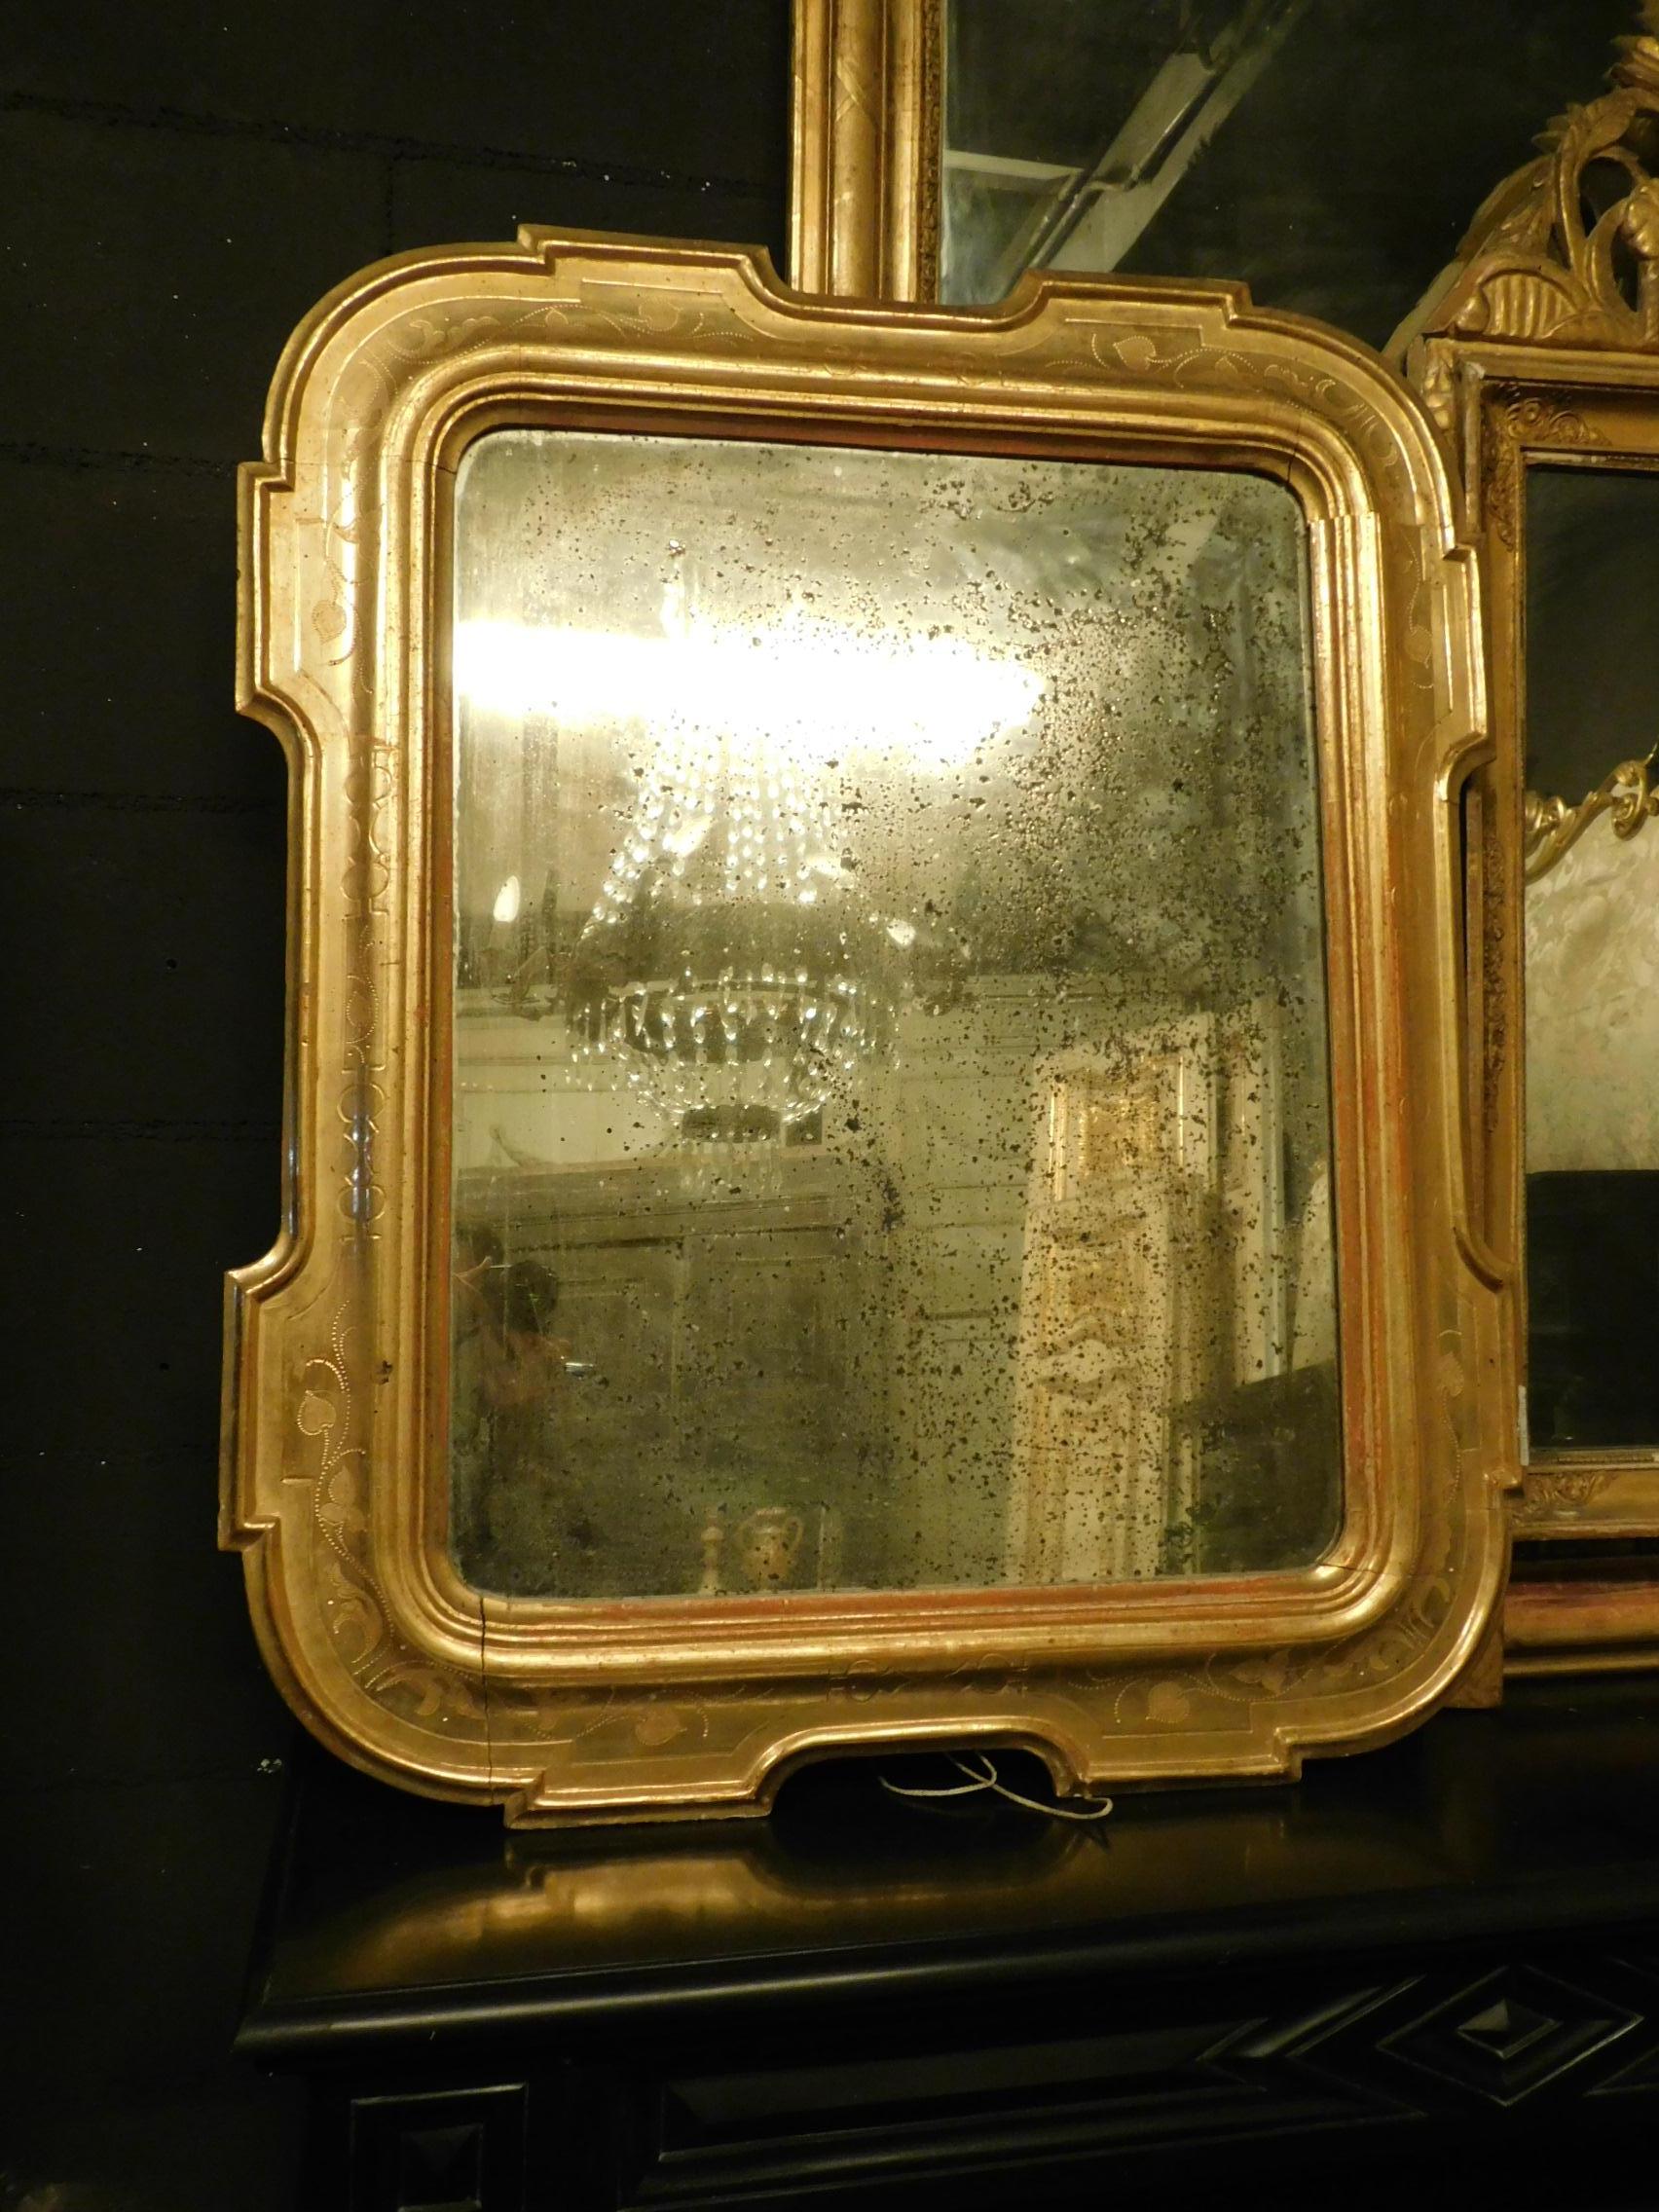 Antique gilded wood rectangular mirror, with frame bas-reliefs, wings and flower decoration, Umbertino period (1800), Italy origin, convenient to use in all environments and of good measure to mirror us.